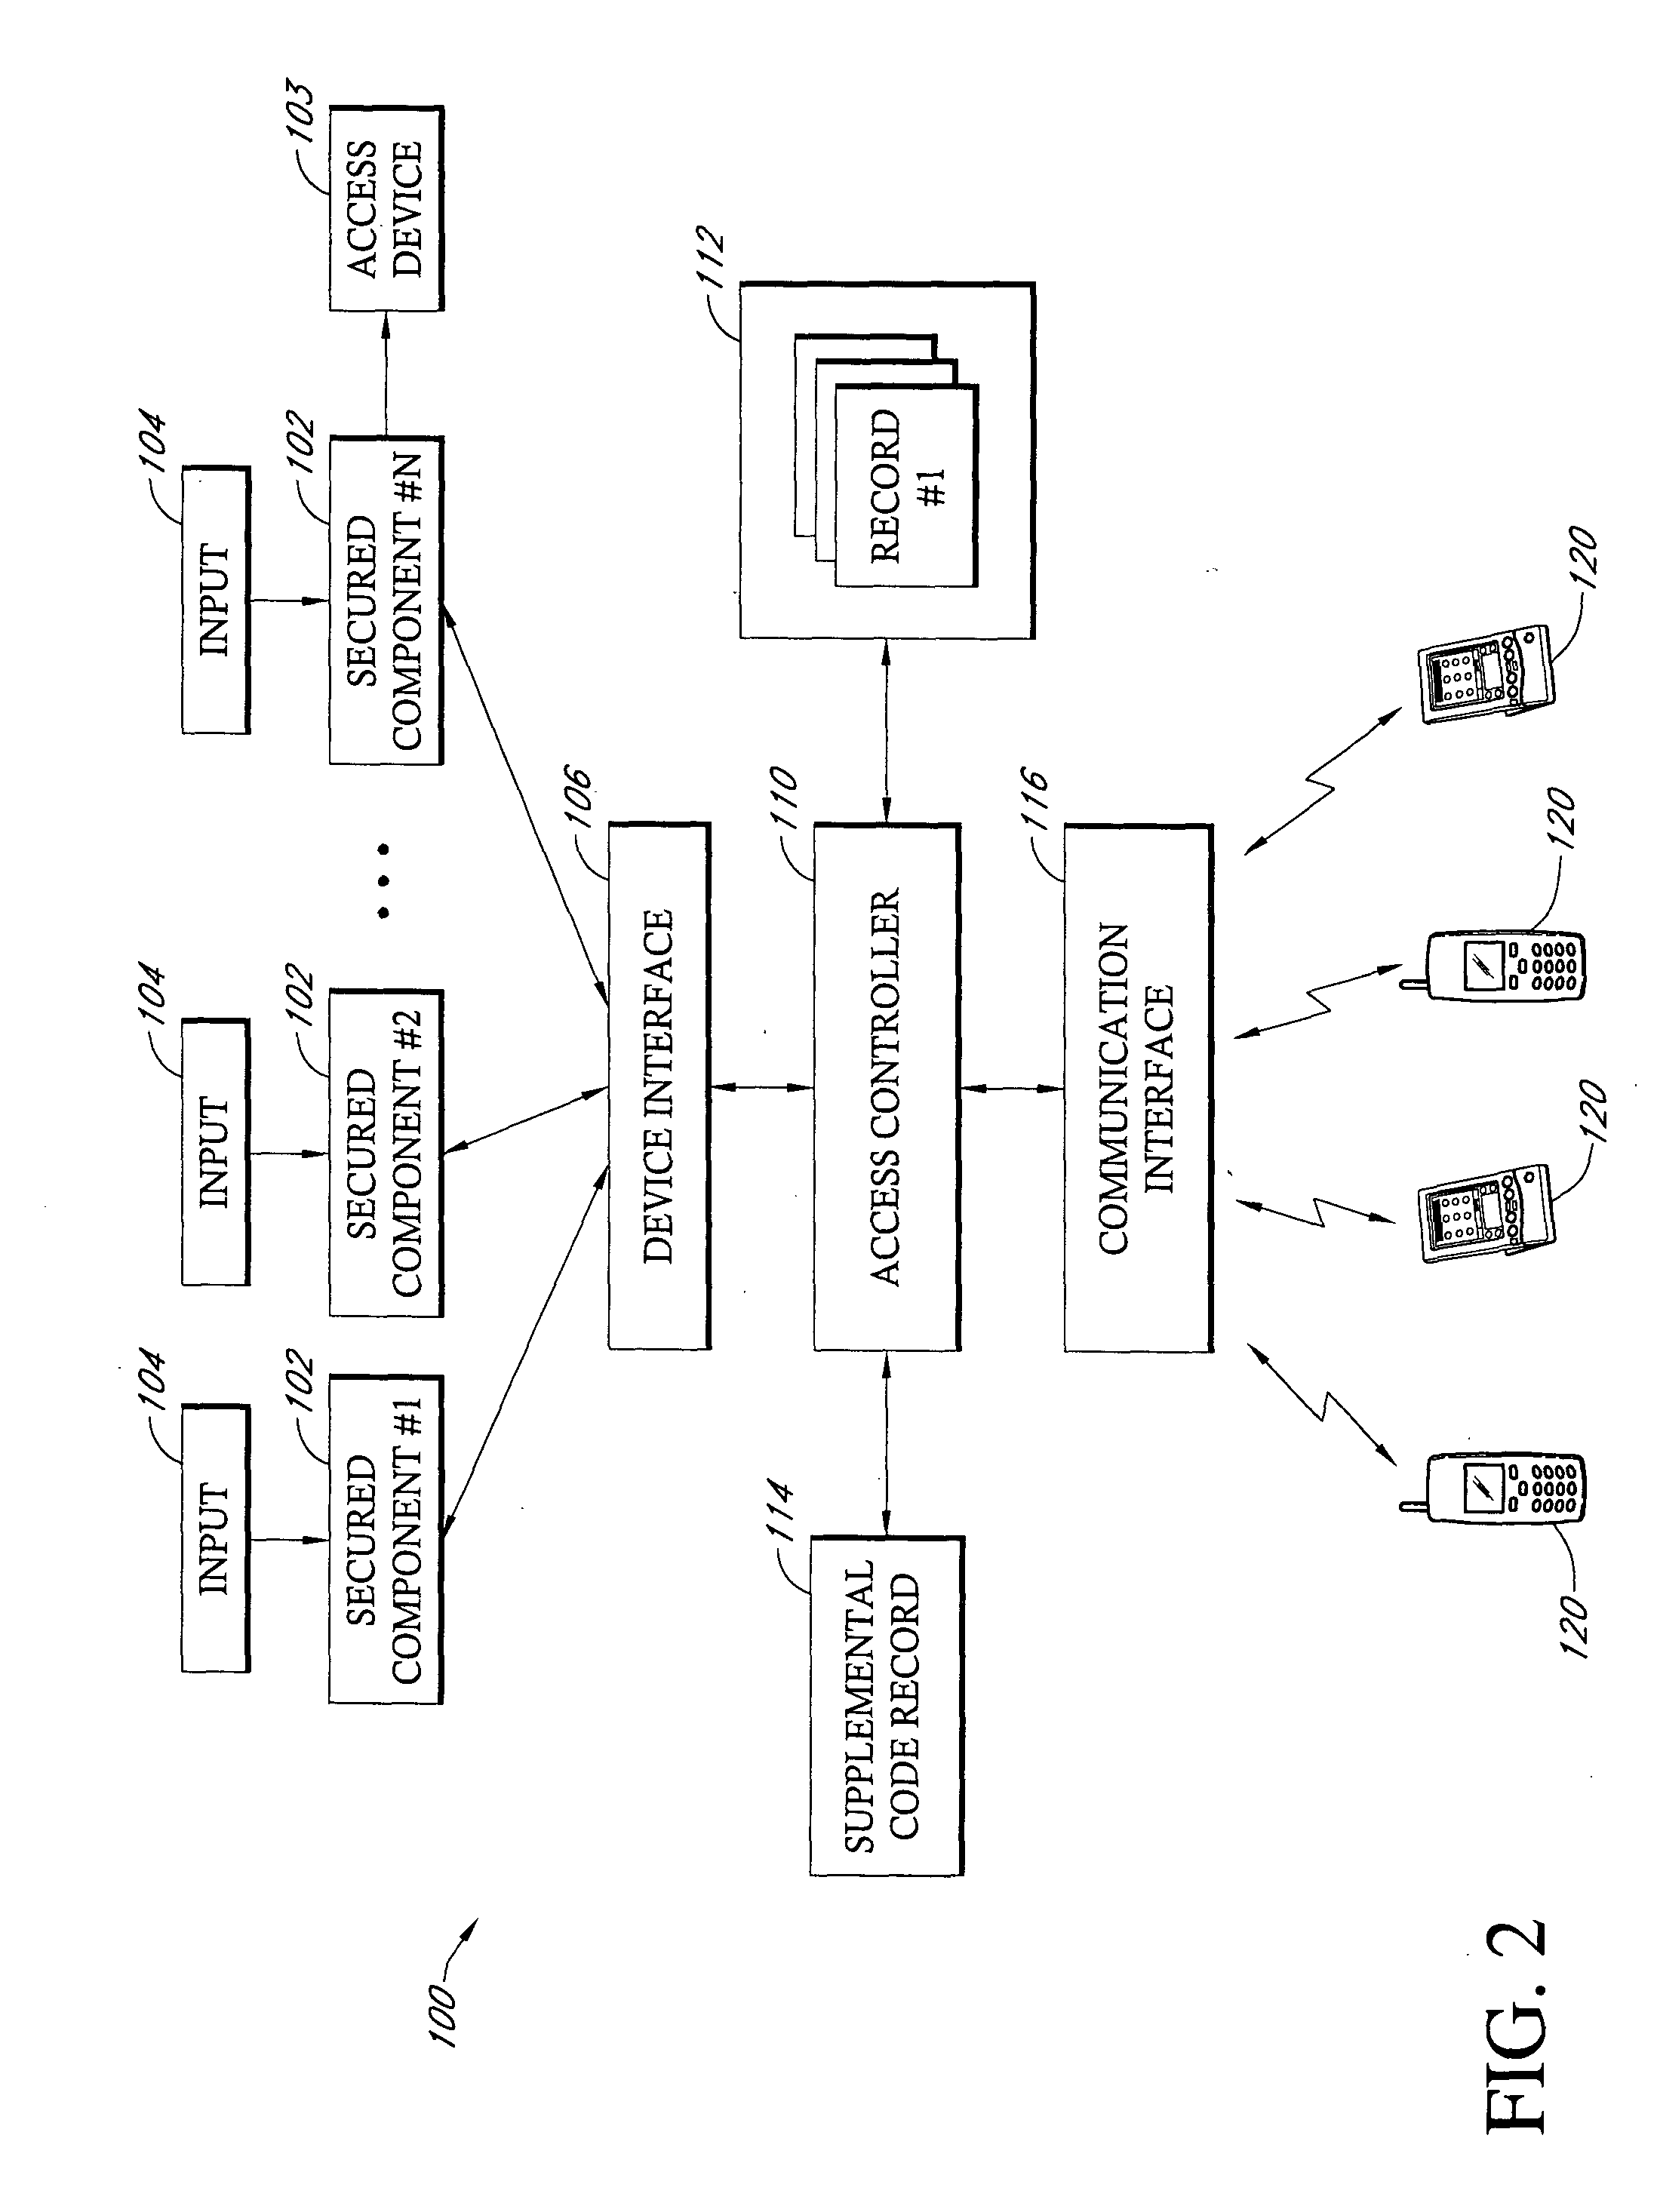 Method and system for secure authentication using mobile electronic devices